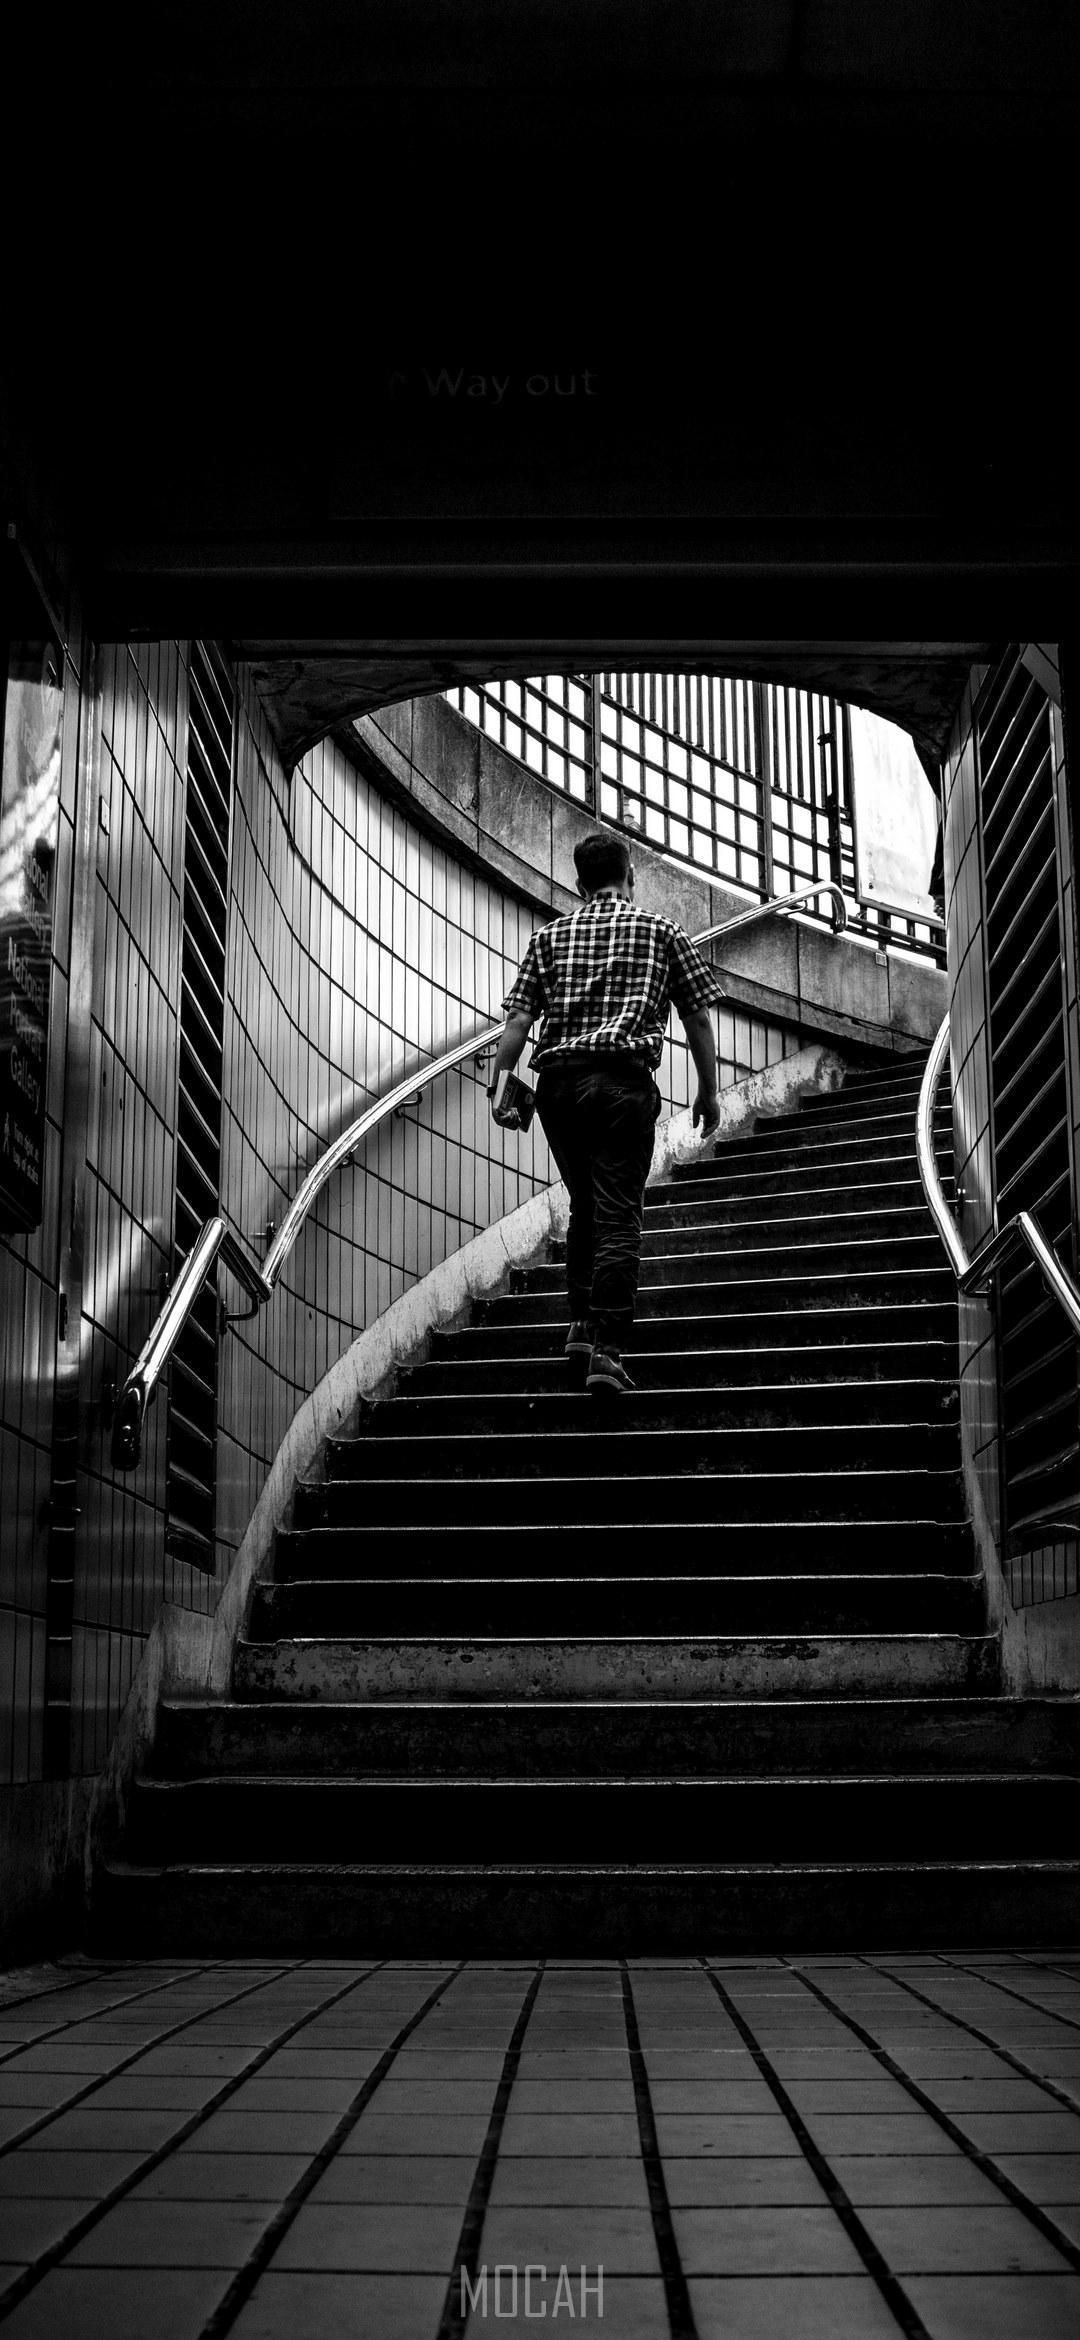 HD wallpaper, A Man Walks Up The Stairs Of A Subway In London, Samsung Galaxy M40 Wallpaper Download, 1080X2340, Highway To Heaven